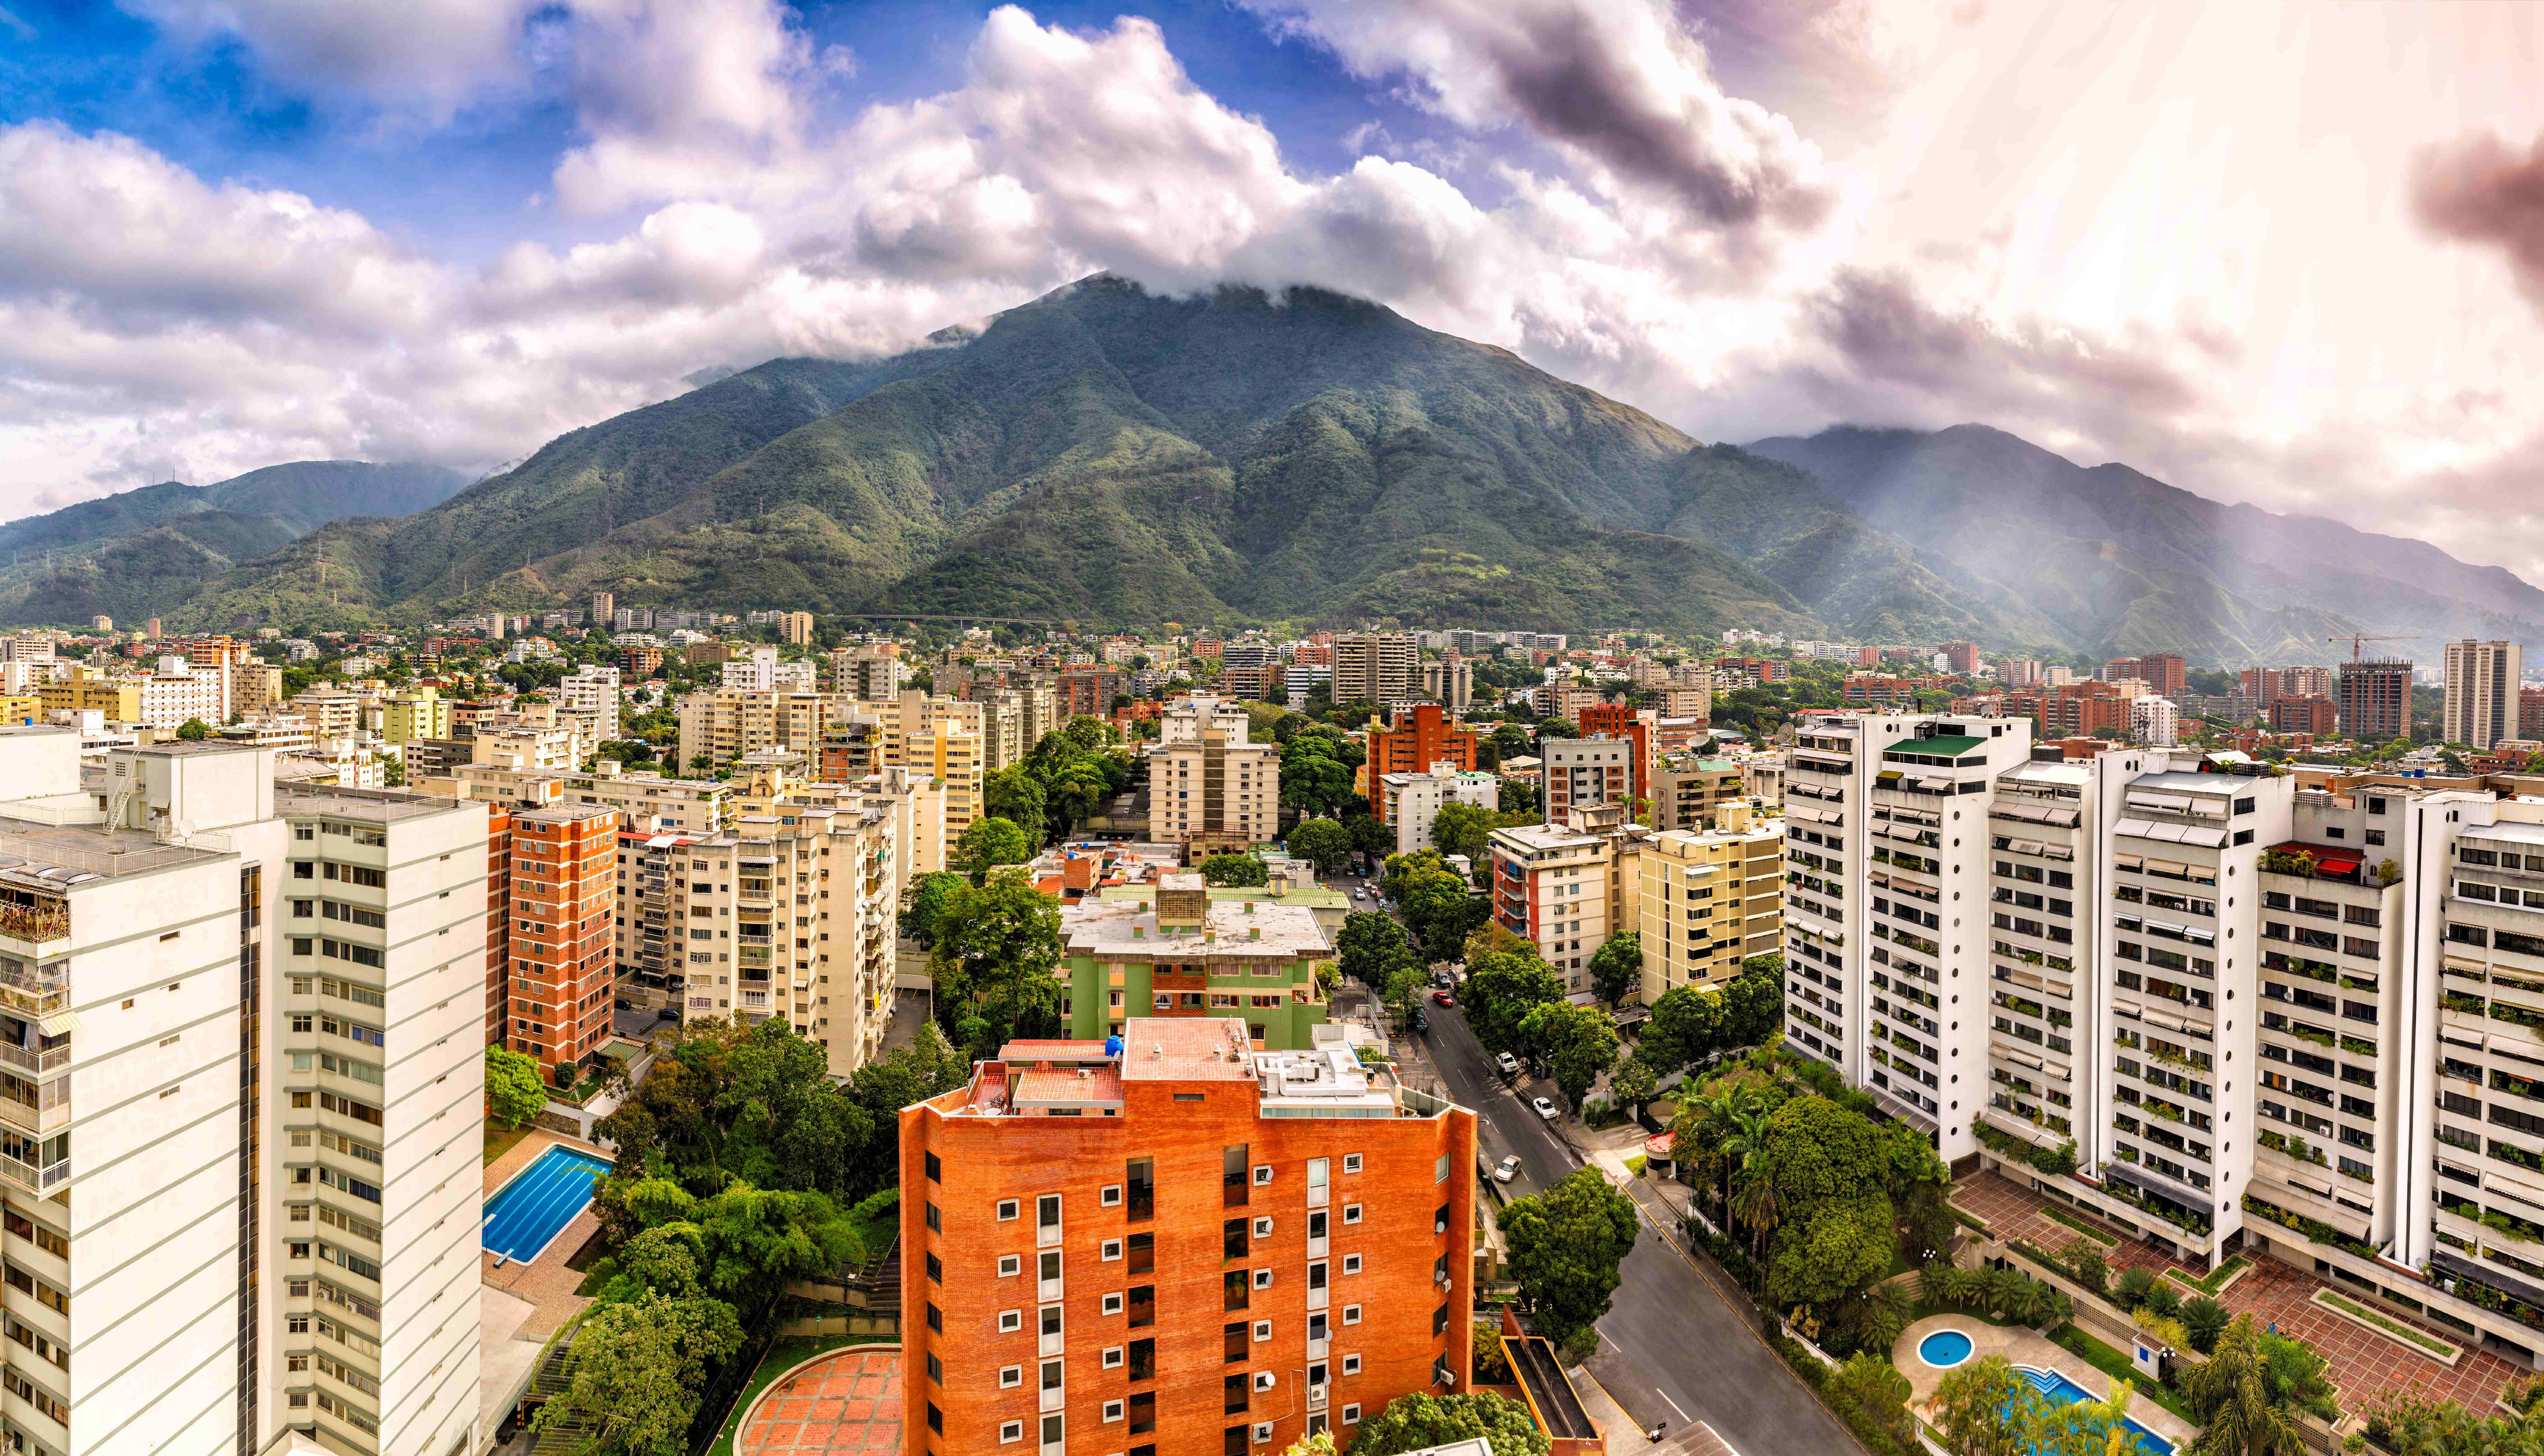 34-facts-about-caracas